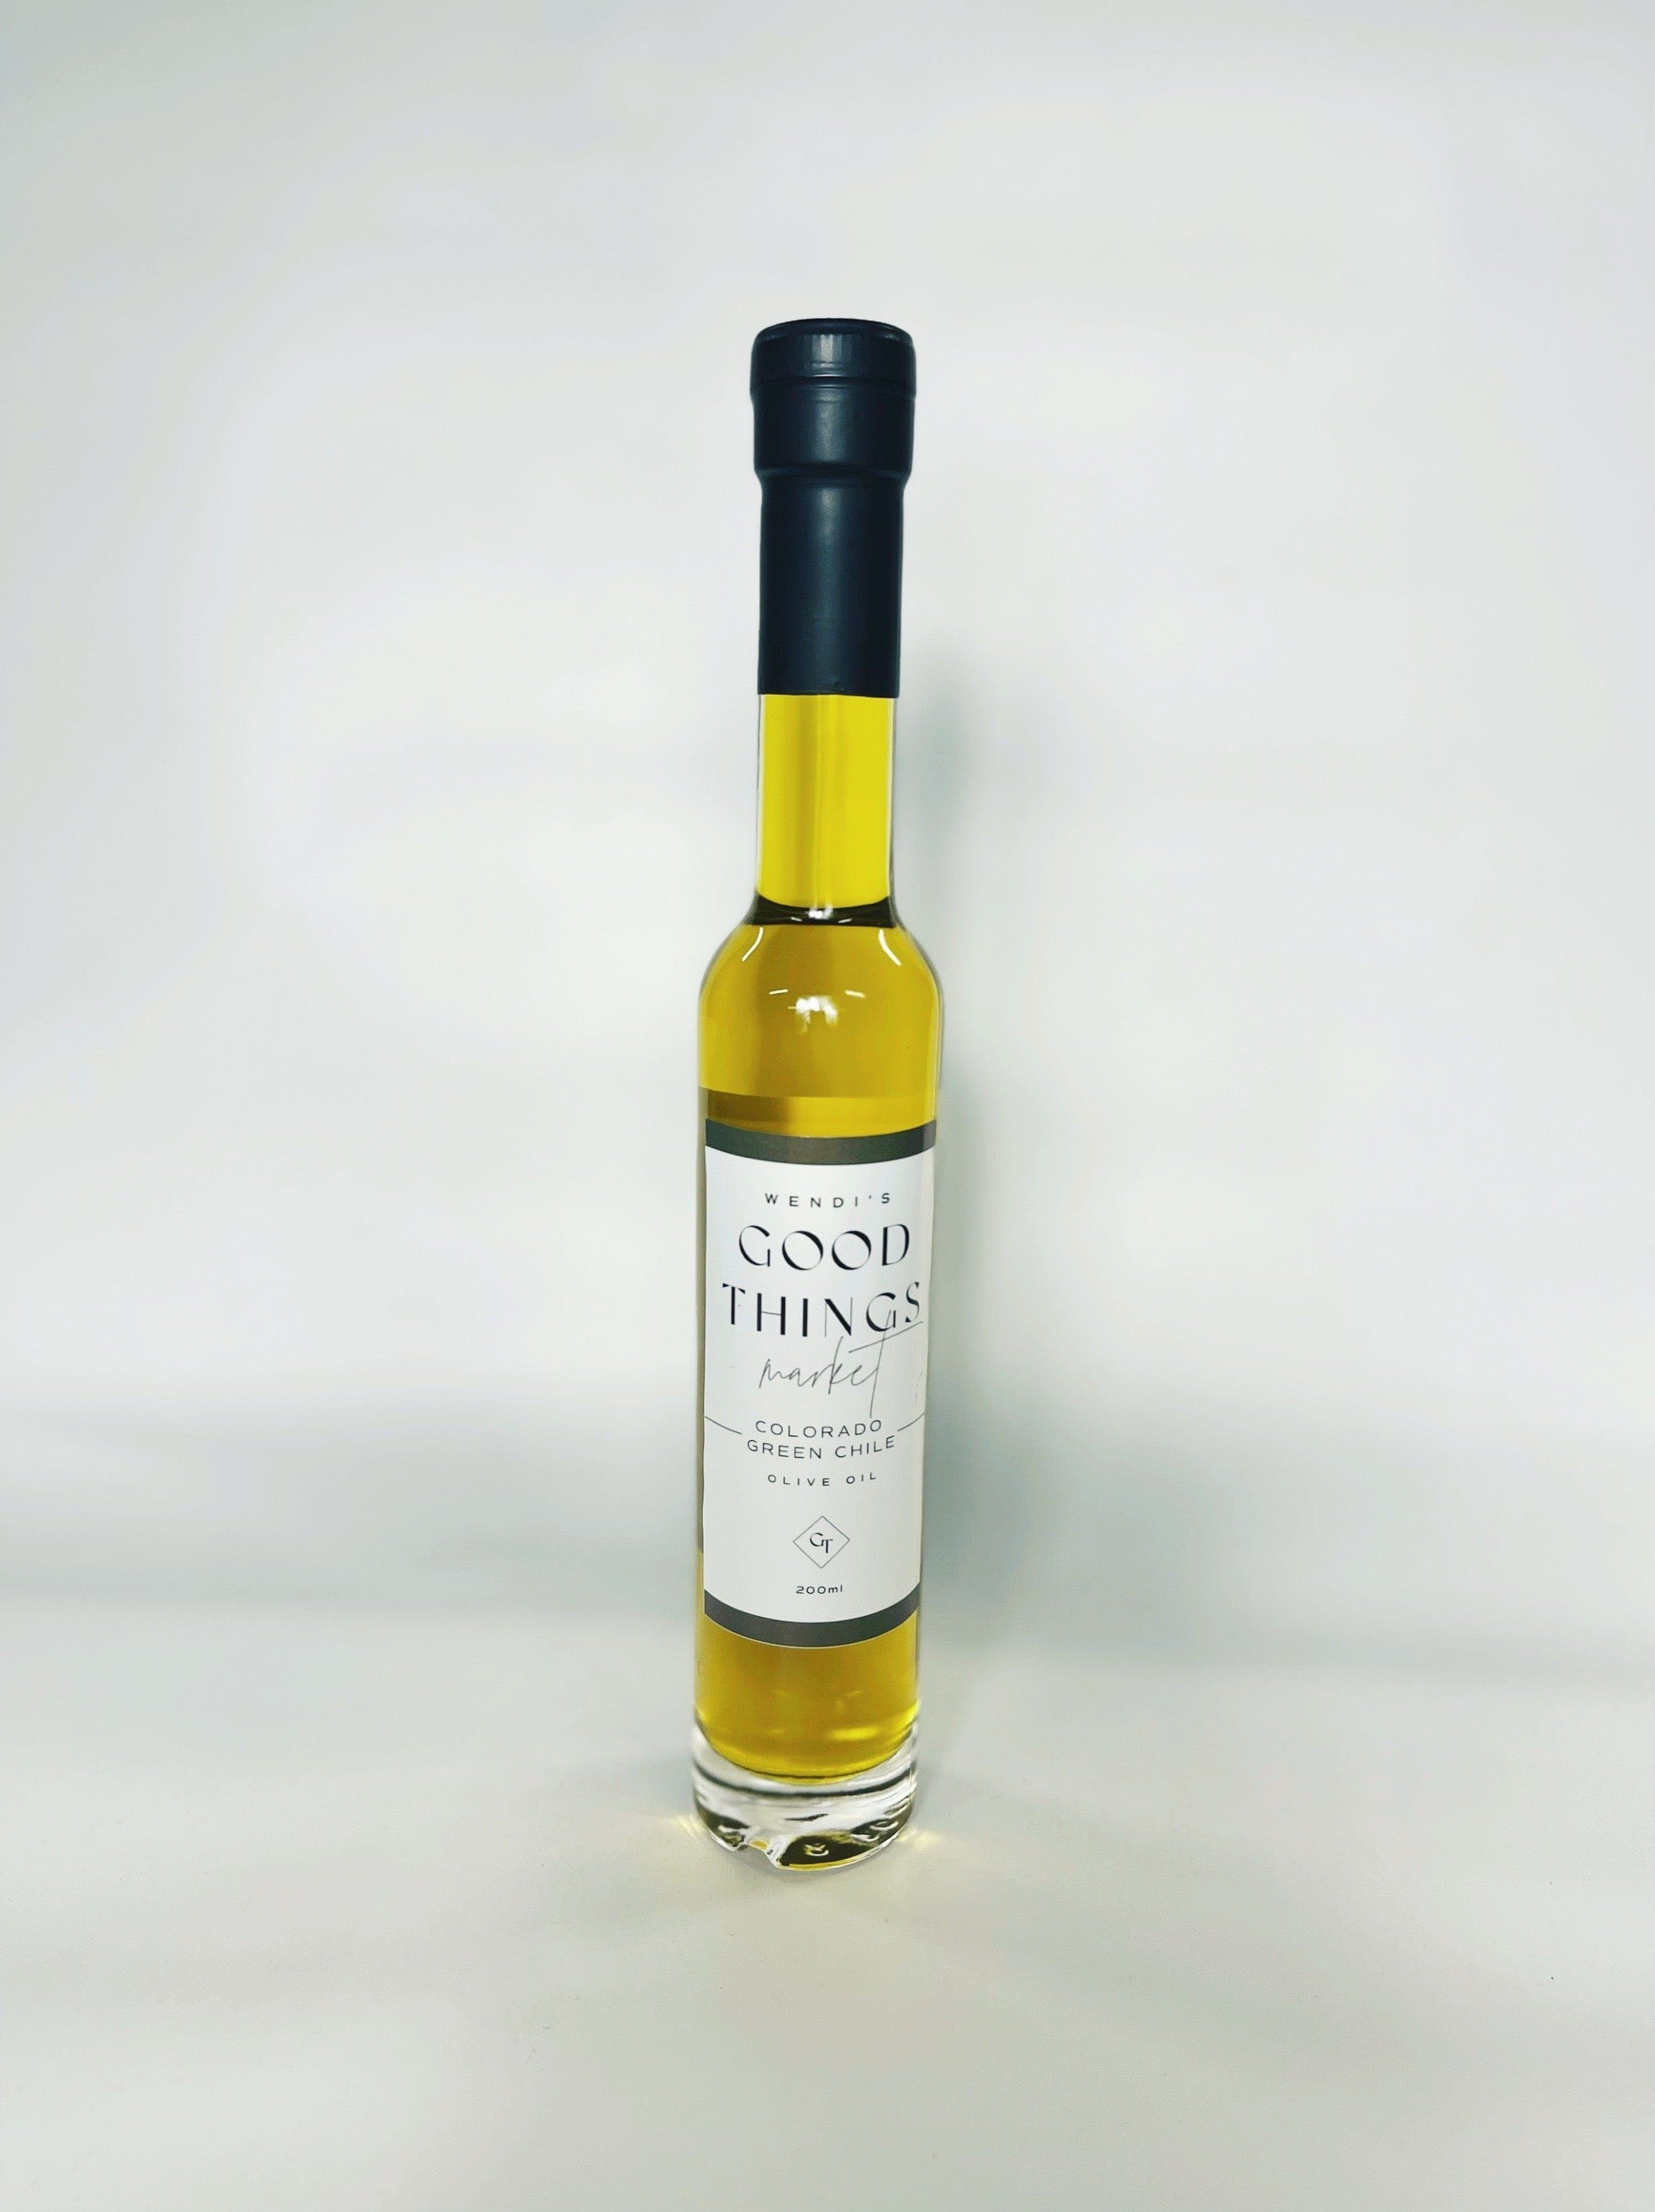 green chile olive oil, wendi's good things market